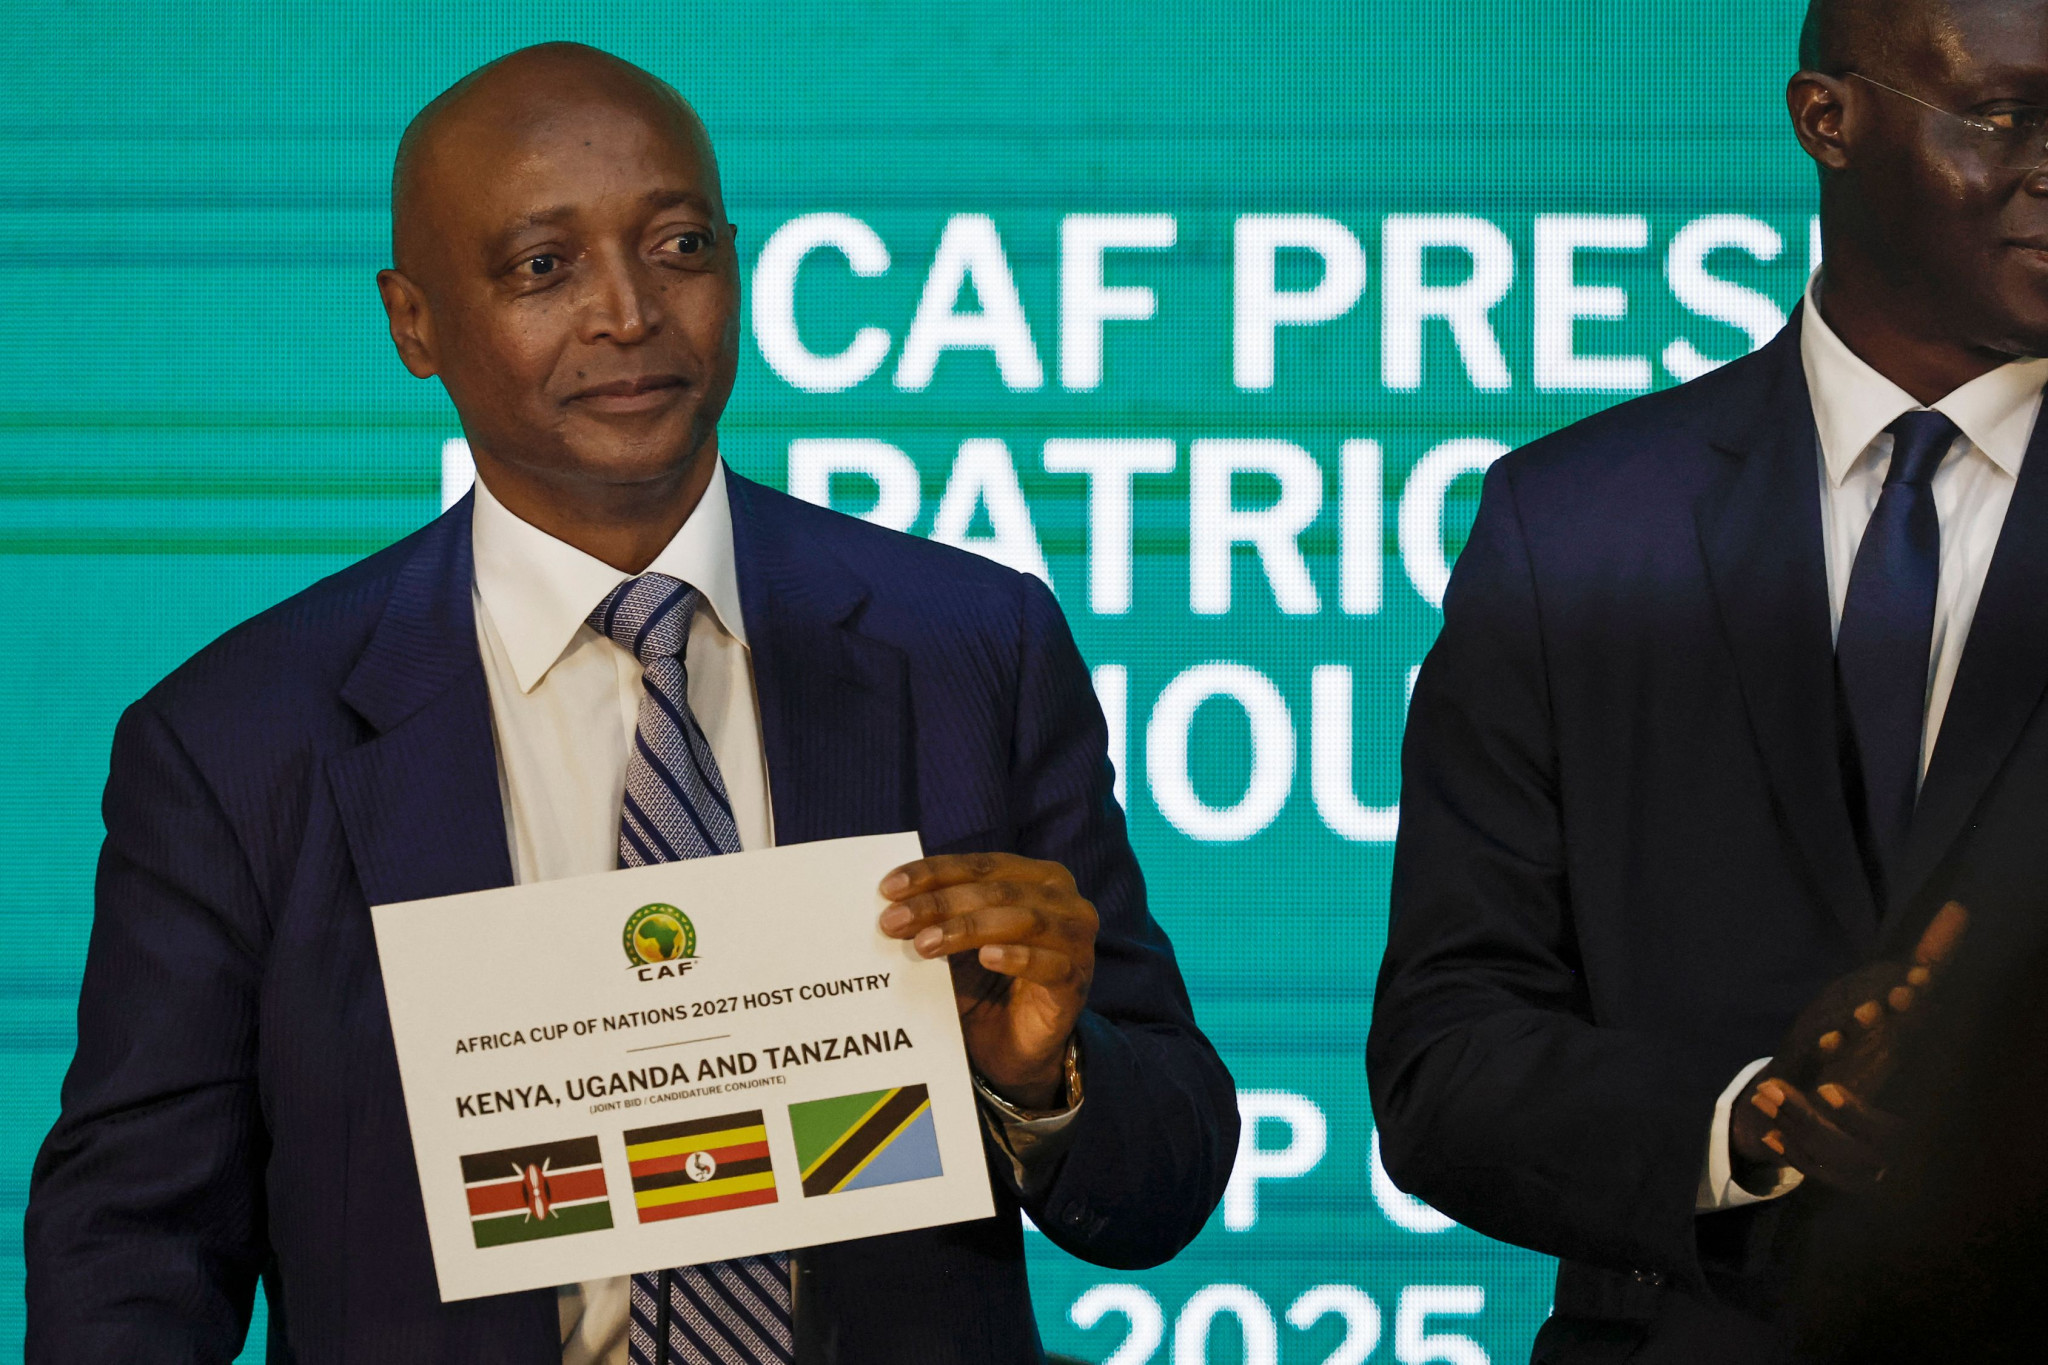 Kenya was awarded the 2027 Africa Cup of Nations along with Uganda and Tanzania earlier this week ©Getty Images